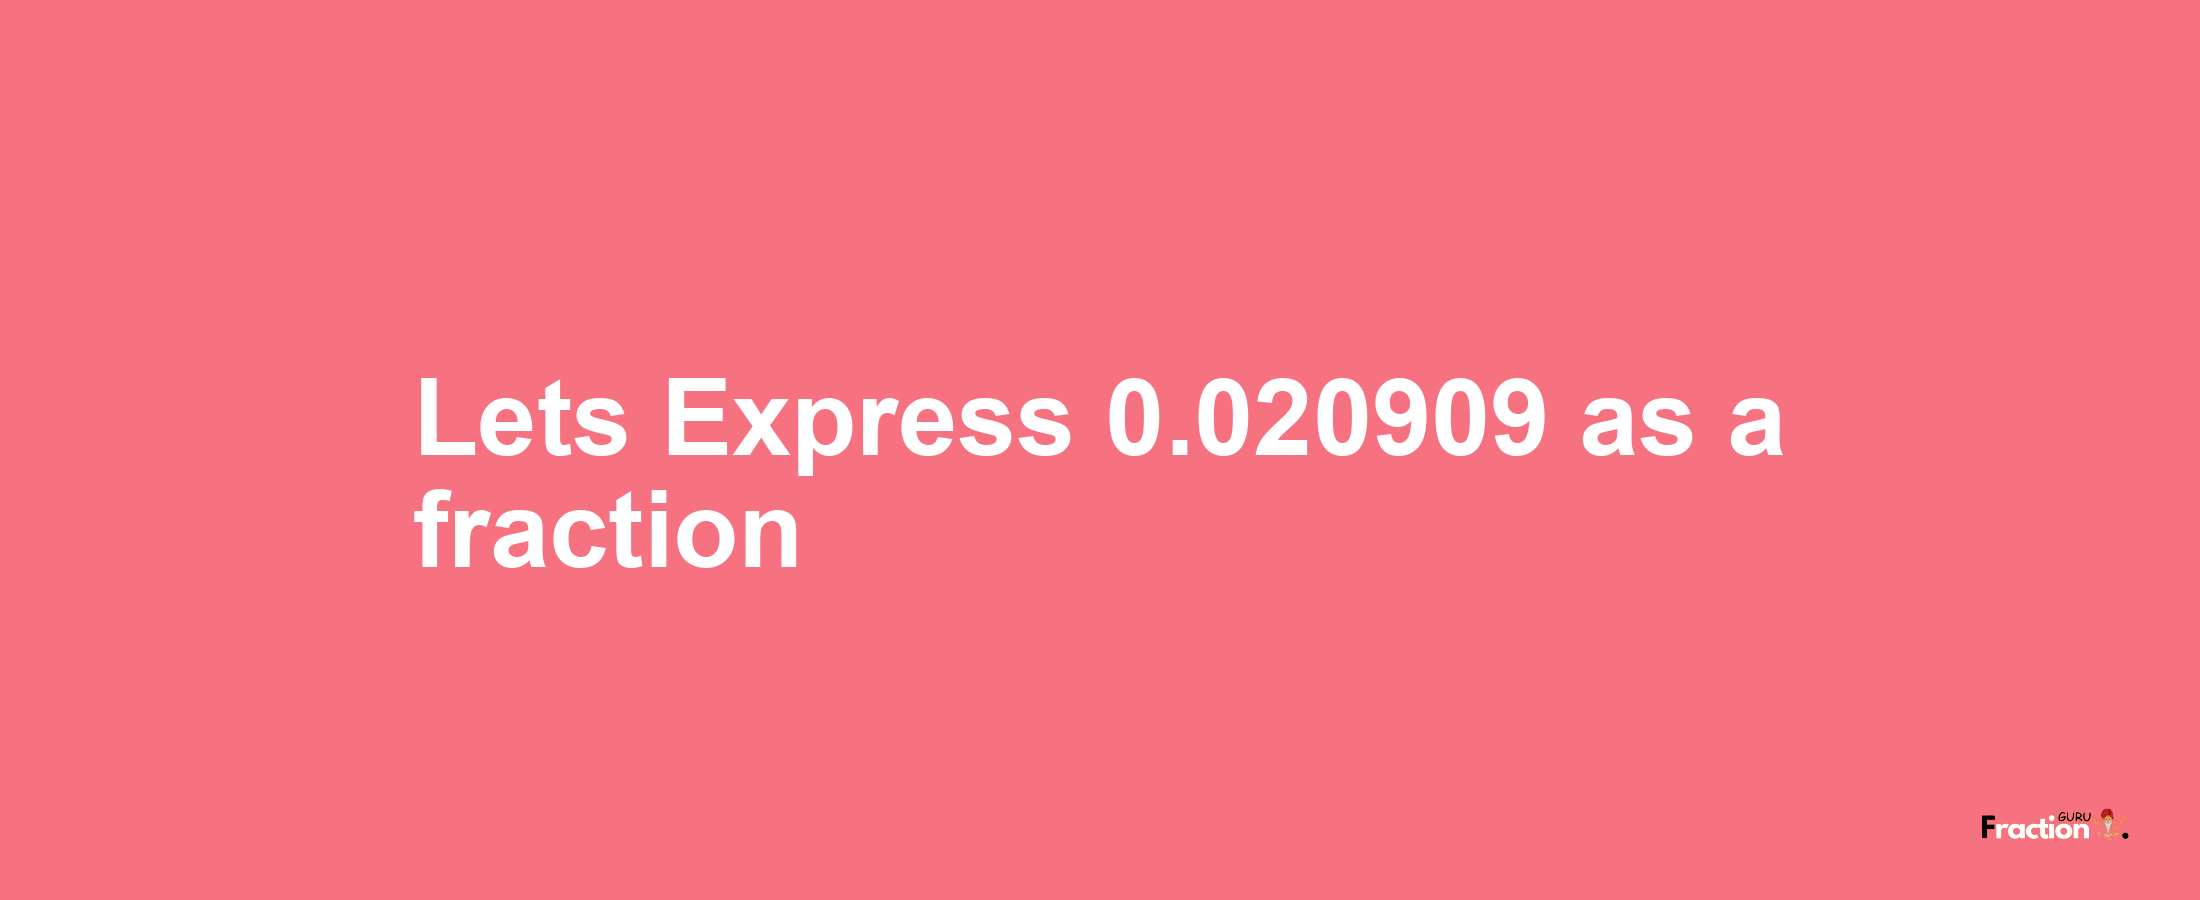 Lets Express 0.020909 as afraction